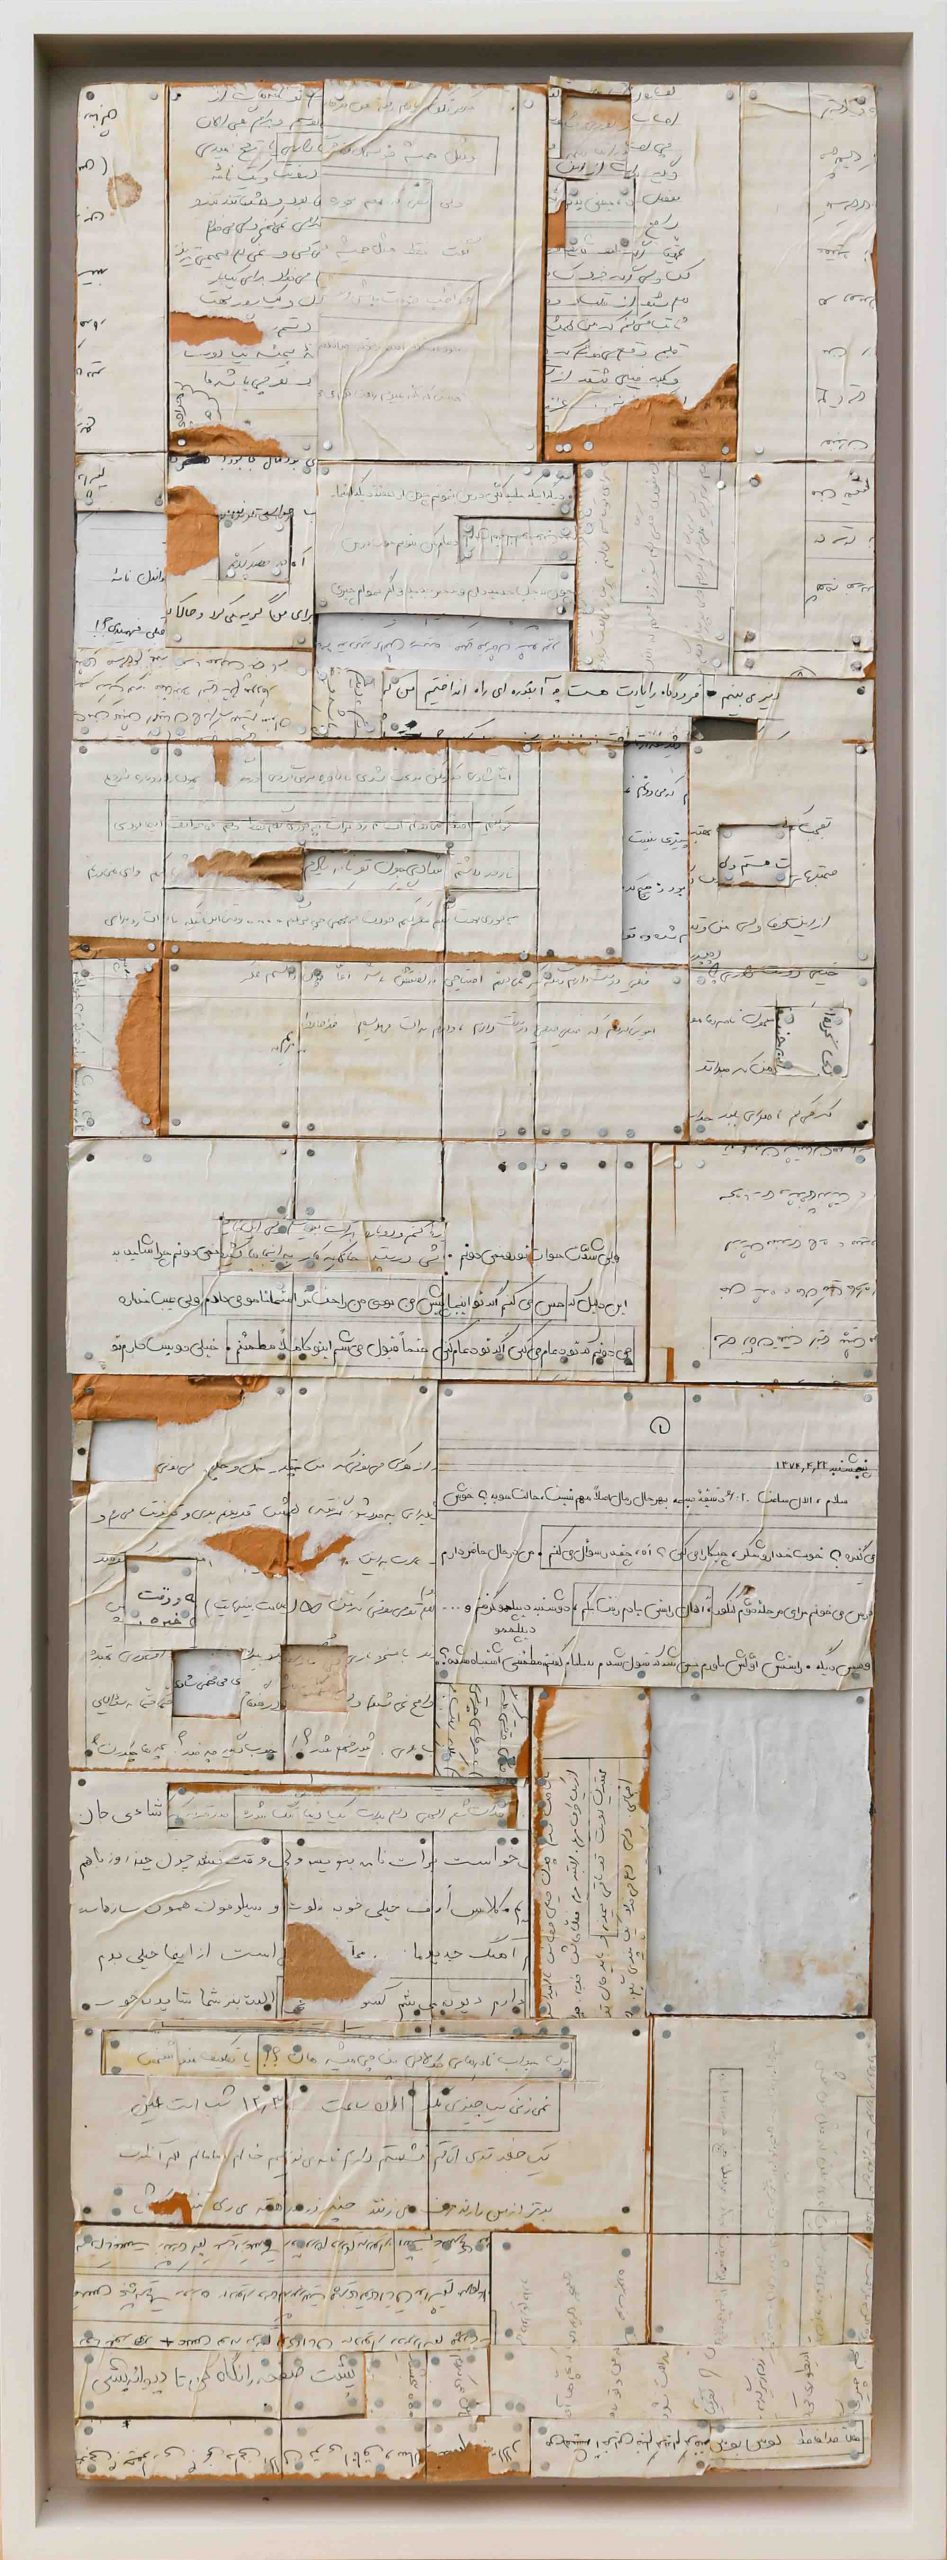 Letters 25, 2020, Photocopied letters pasted on wood, 37 x 11 in
Courtesy ADVOCARTSY and the artist.